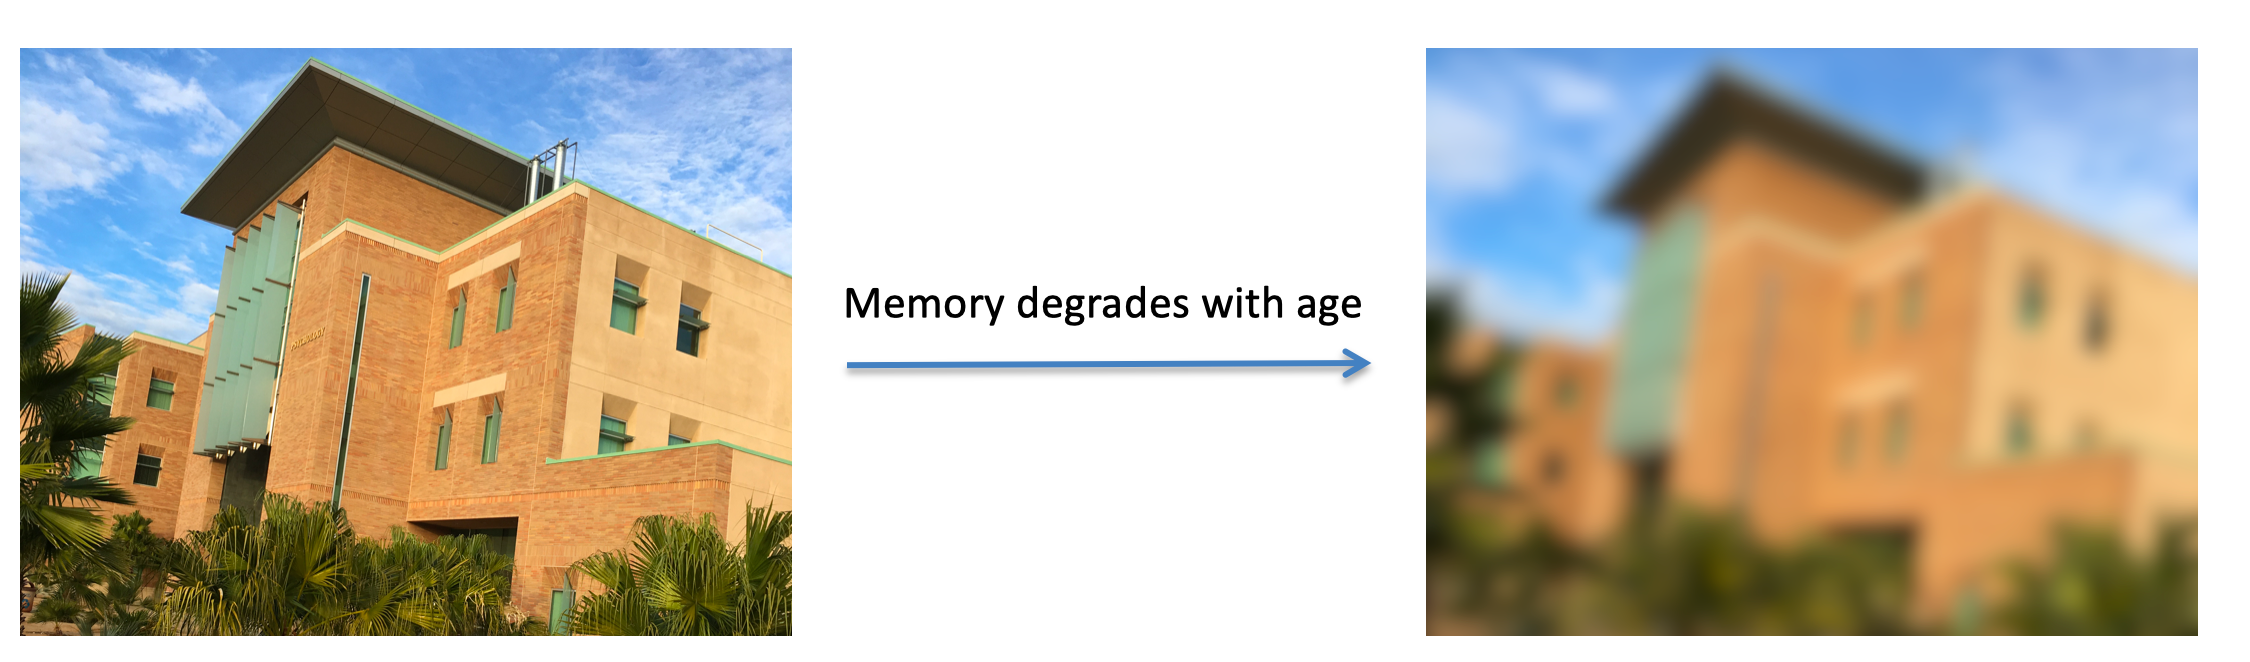 Memory degrades with age